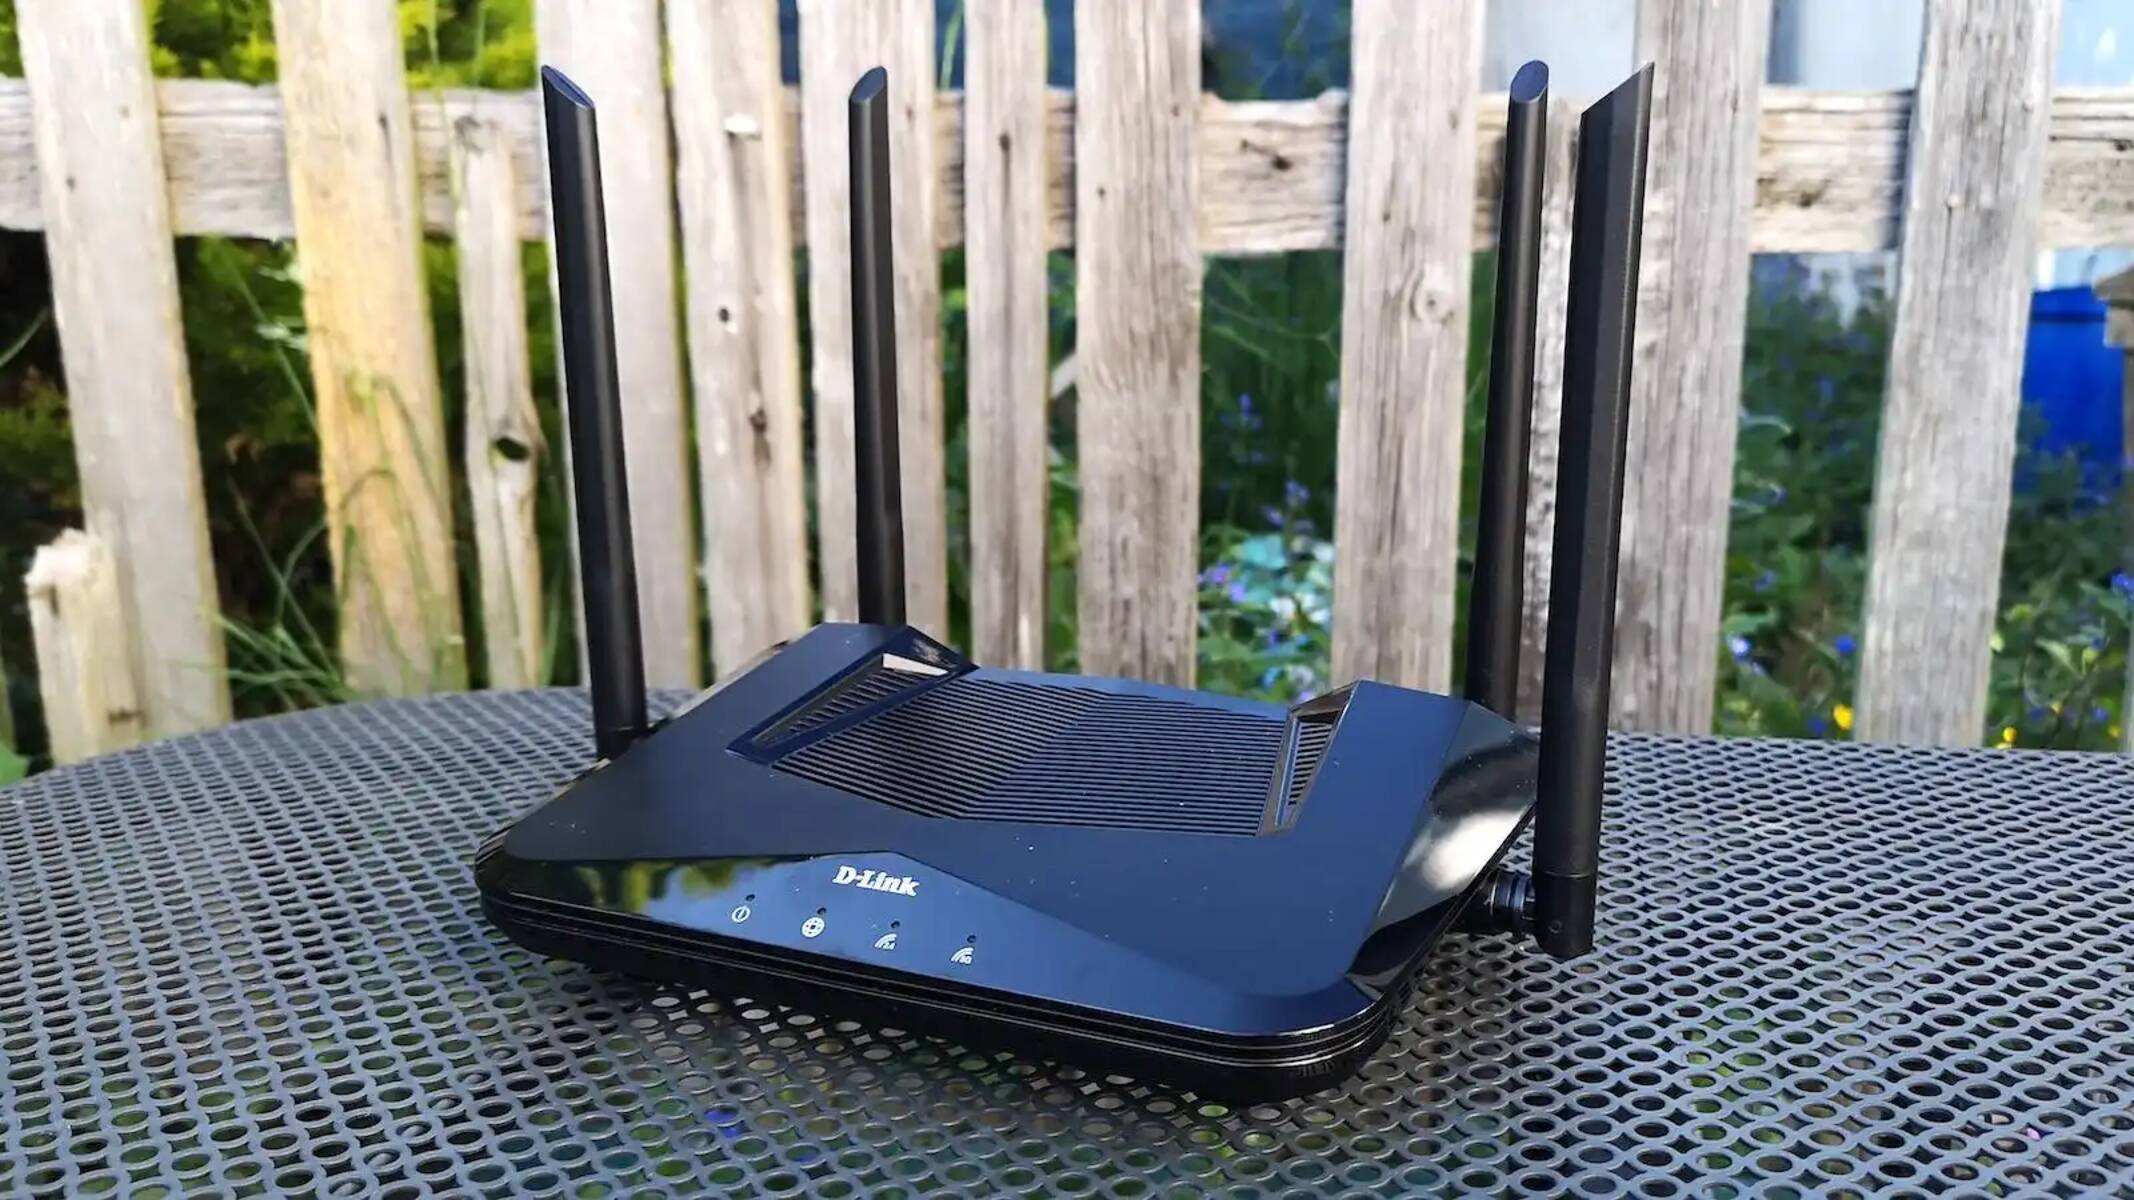 How Much Does A Dlink Wireless Router Cost